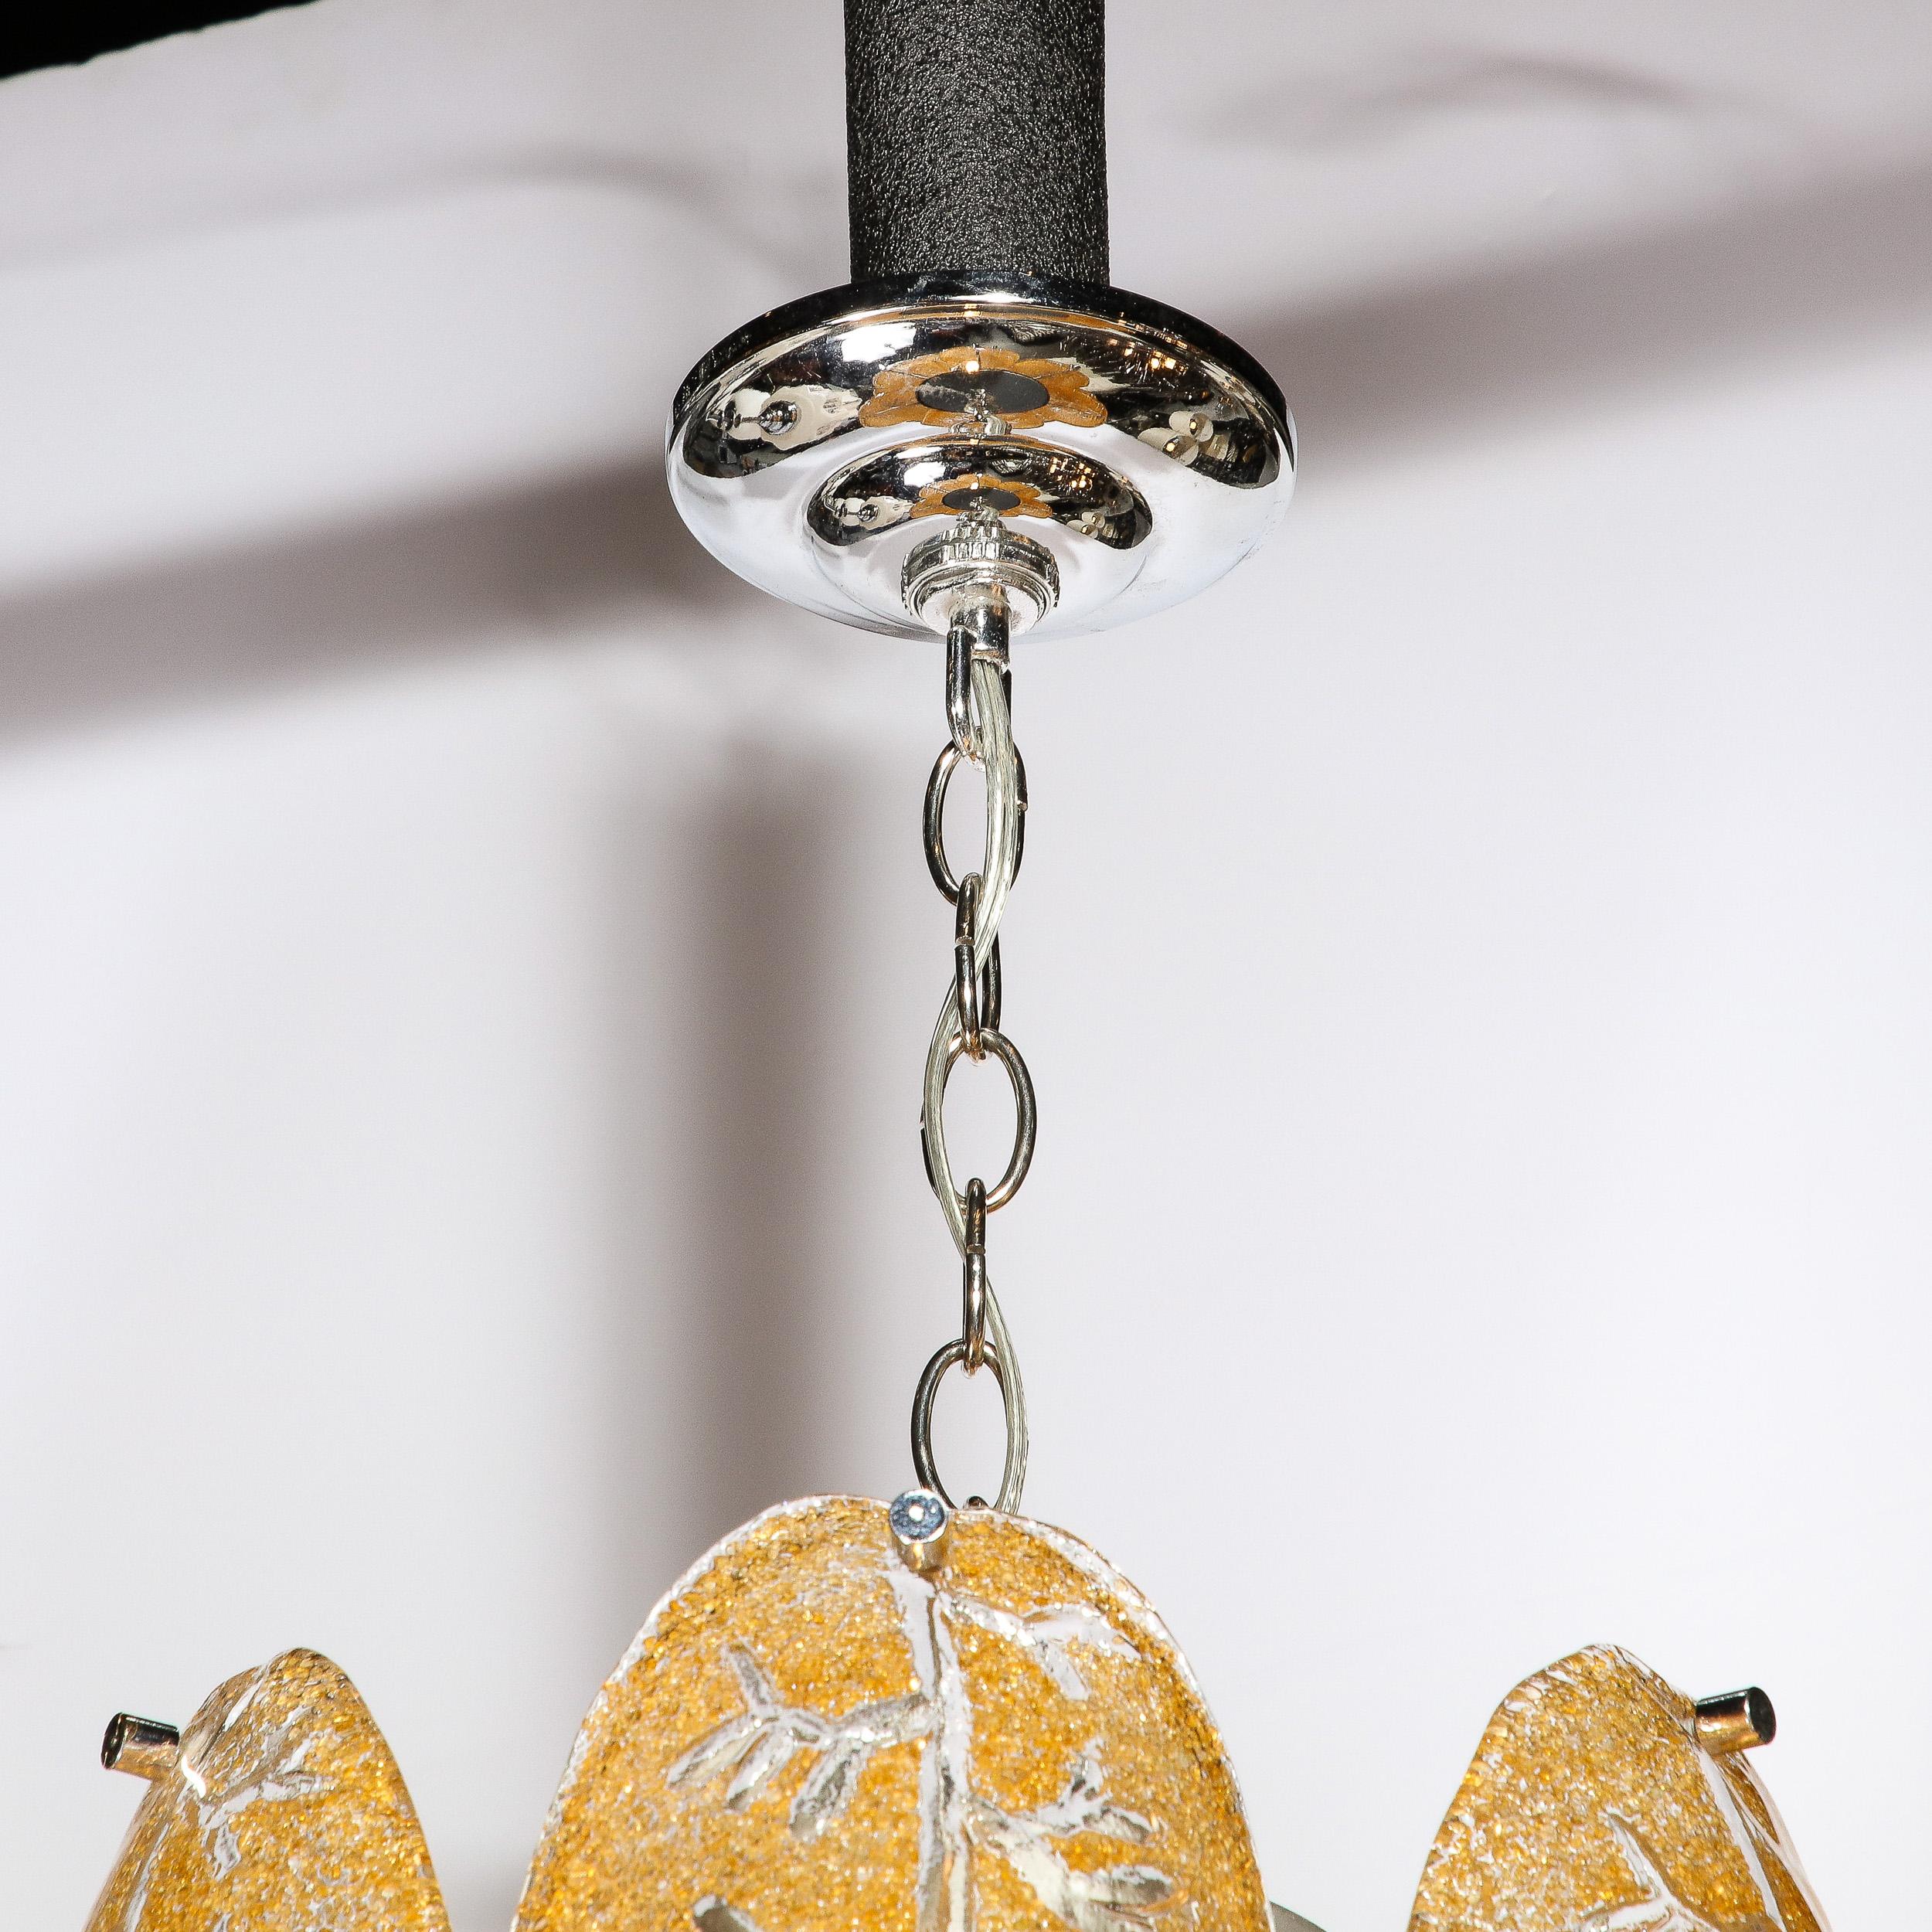 Late 20th Century Mid-Century Modern Three-Tier Leaf Form Chandelier in Crushed Gold Murano Glass For Sale